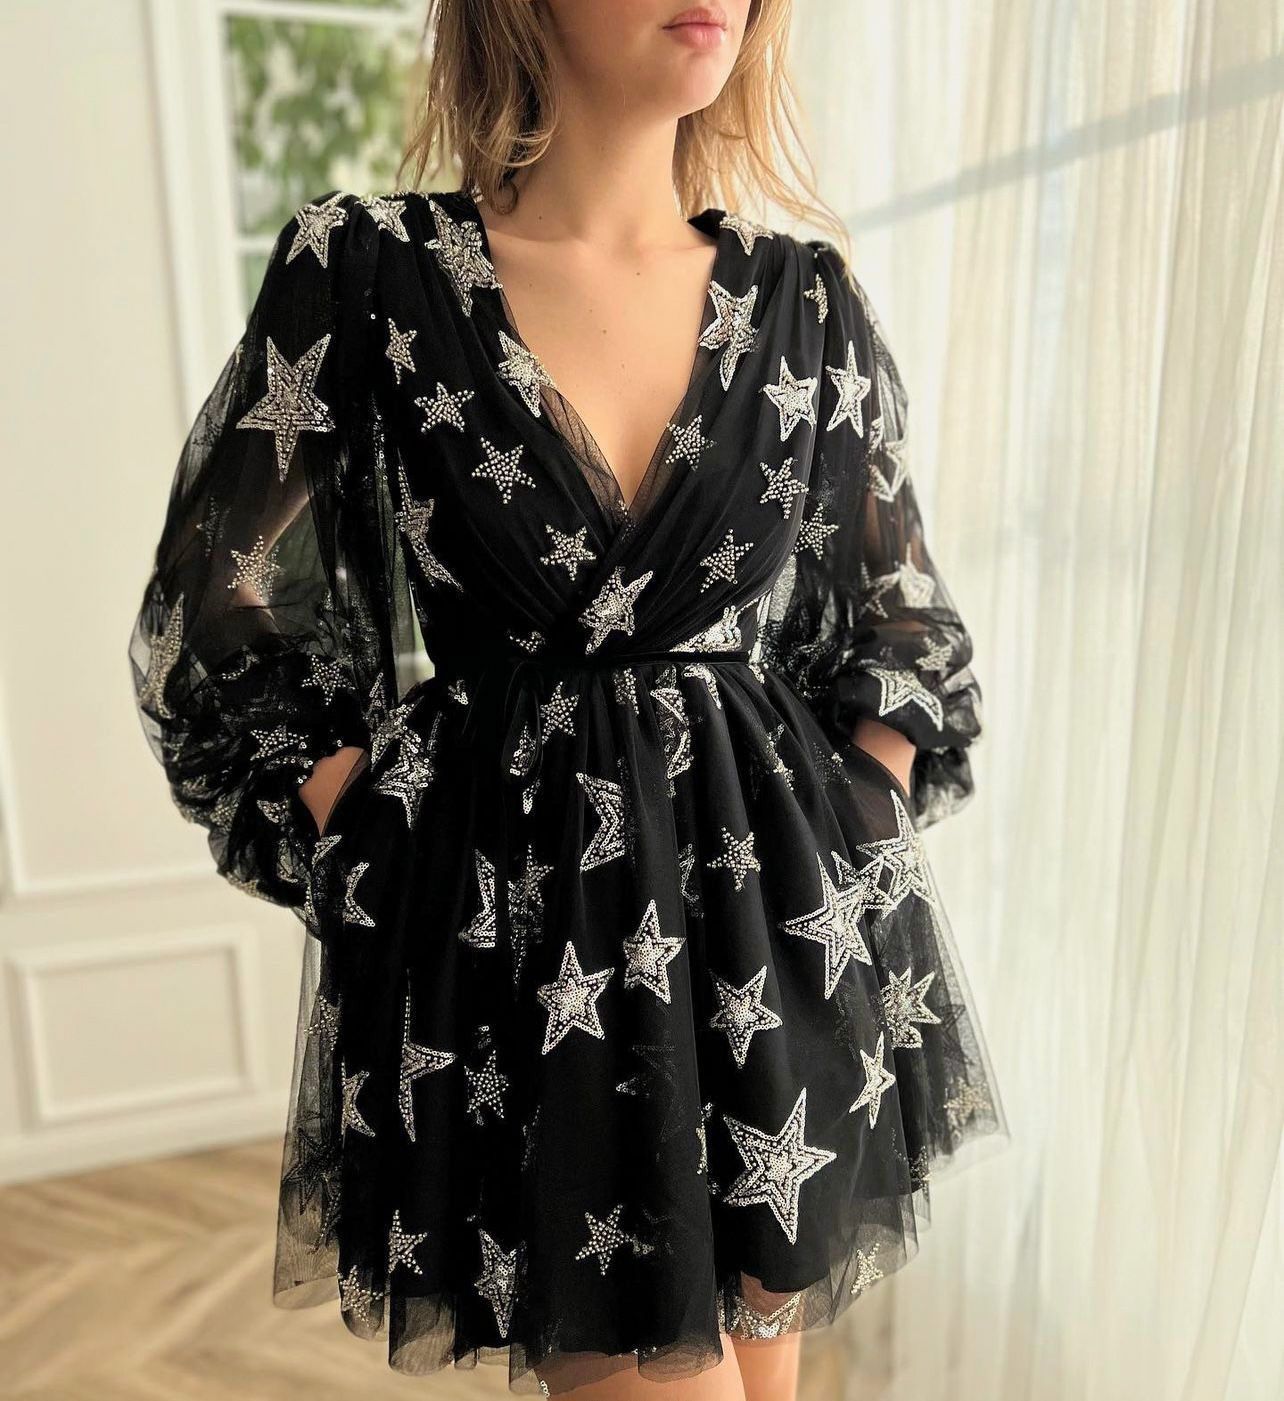 Black mini dress with v-neck, starry fabric and long sleeves